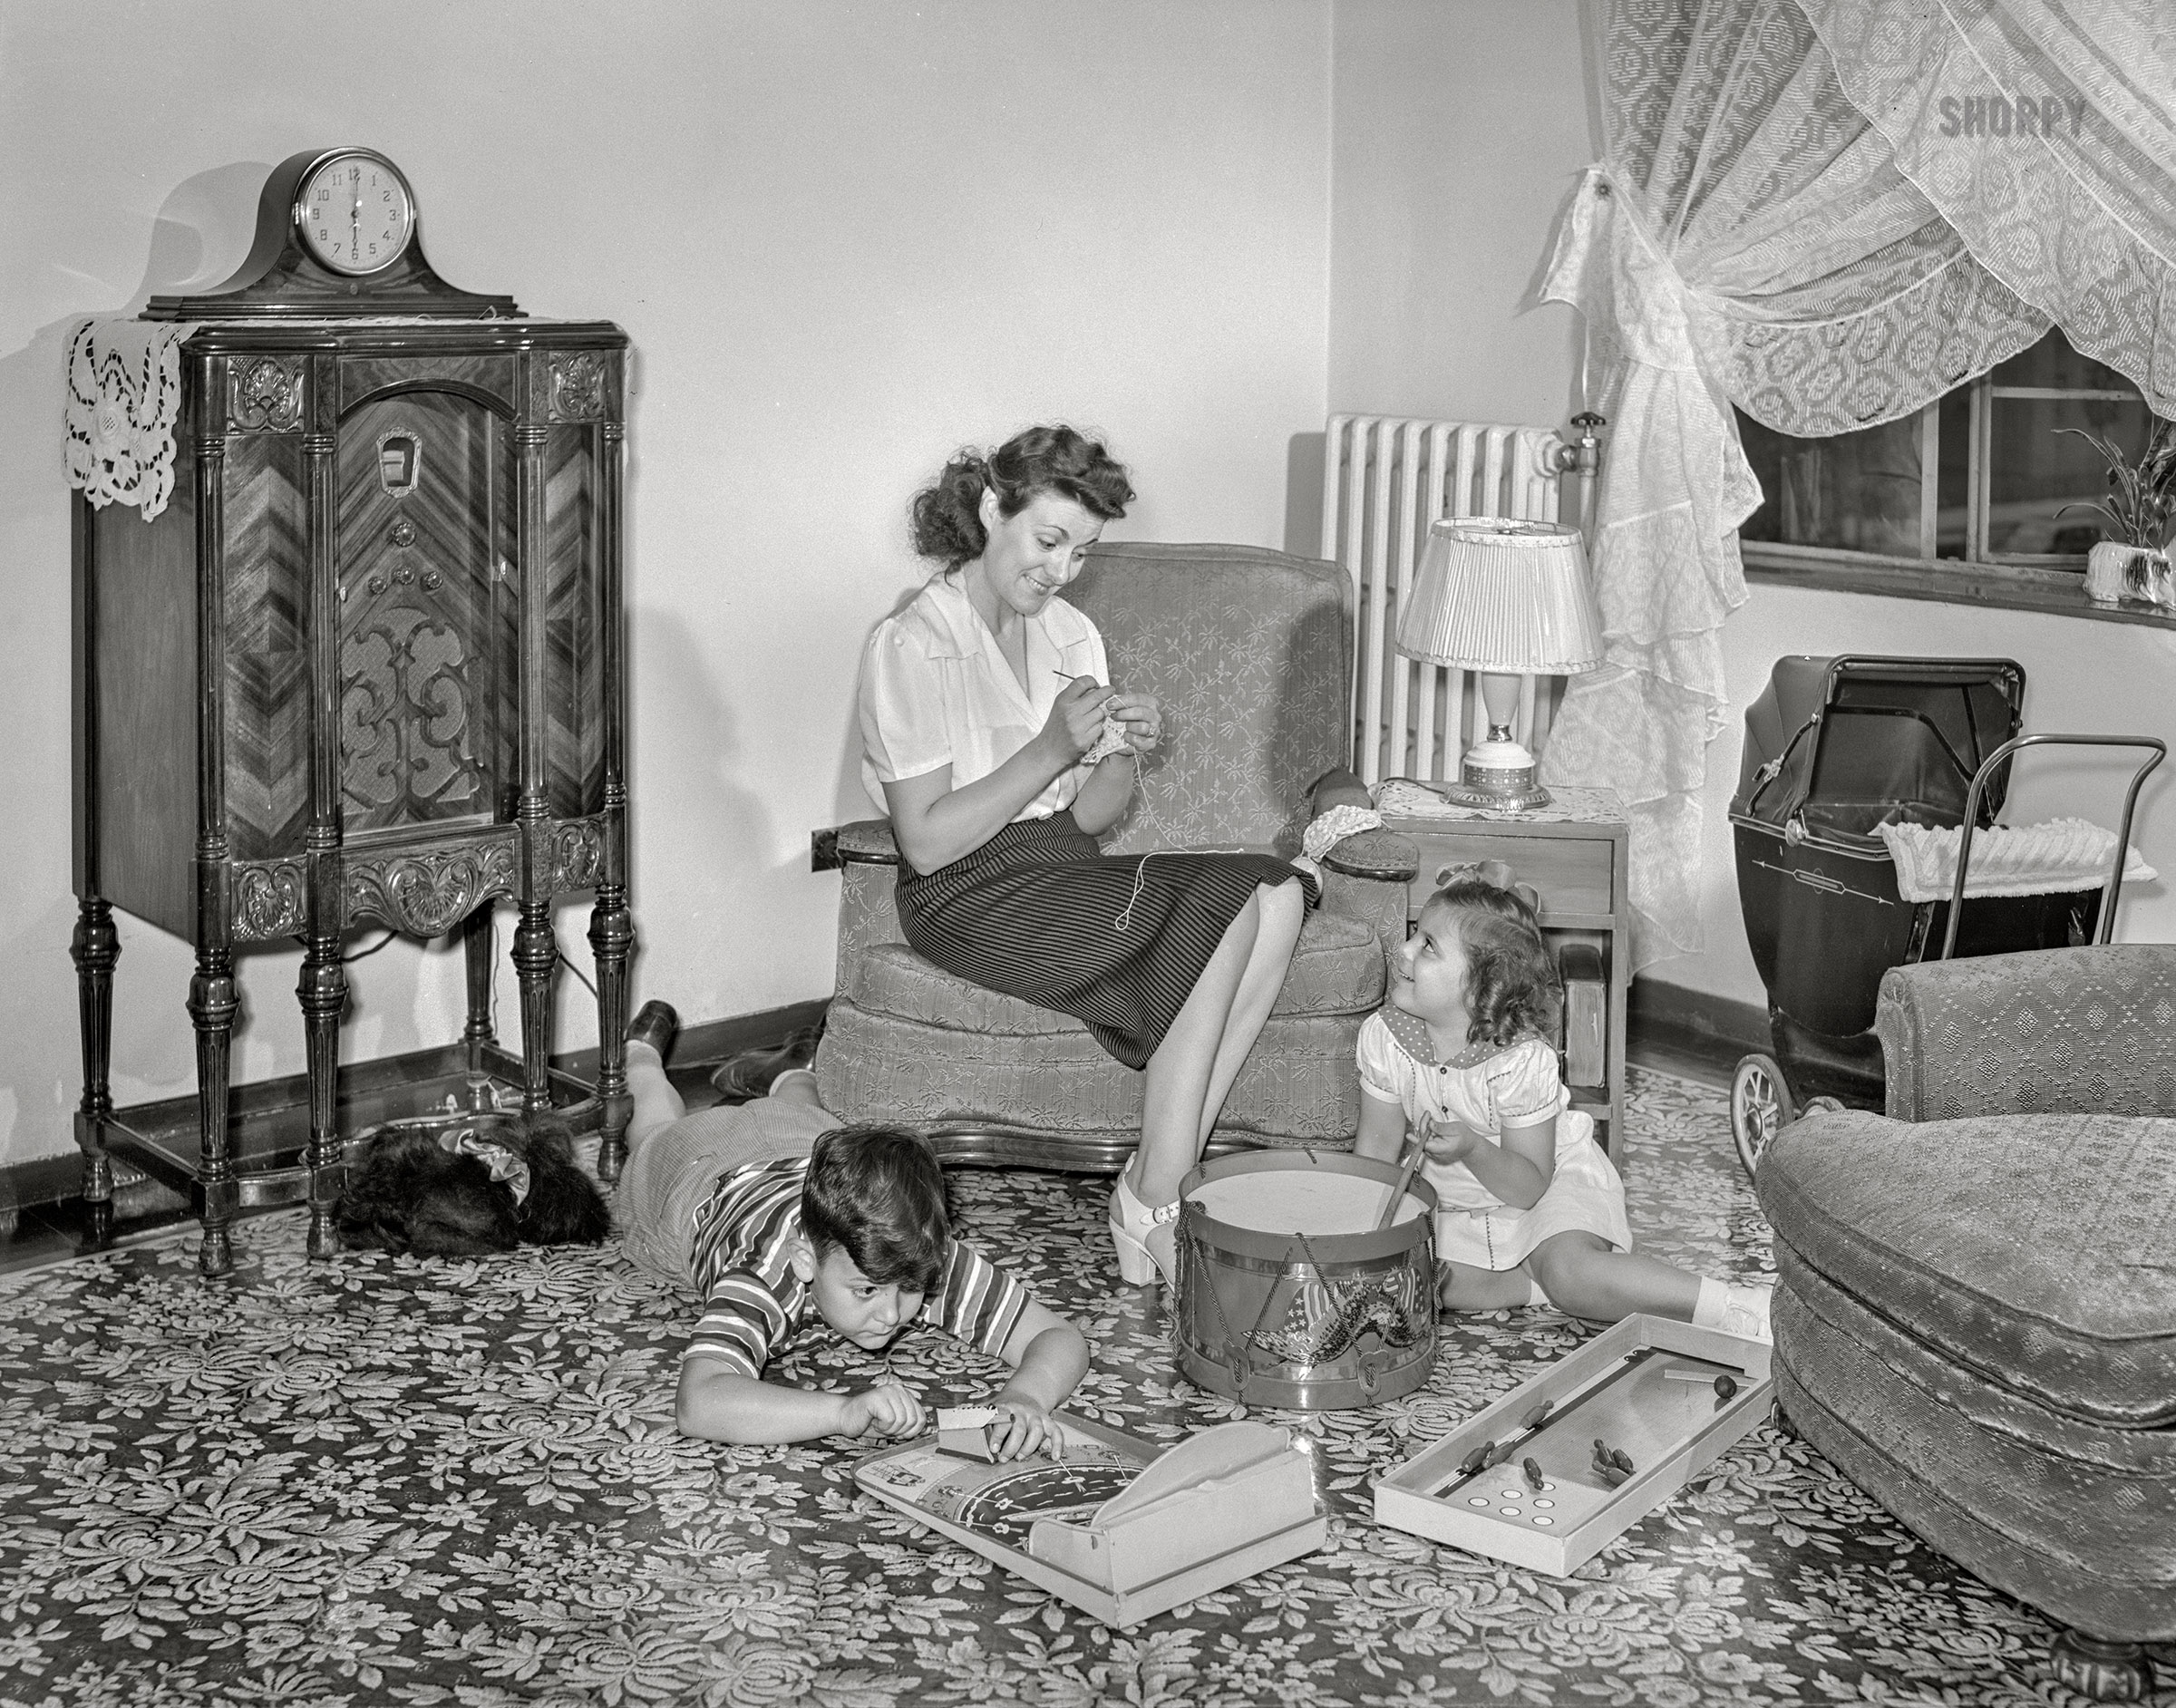 June 1942. "Brooklyn, New York. Red Hook housing development. Mrs. Caputo and her children in the living room of their four-and-a-half room apartment for which they pay $5.35 weekly." Acetate negative by Arthur Rothstein for the Office of War Information. View full size.